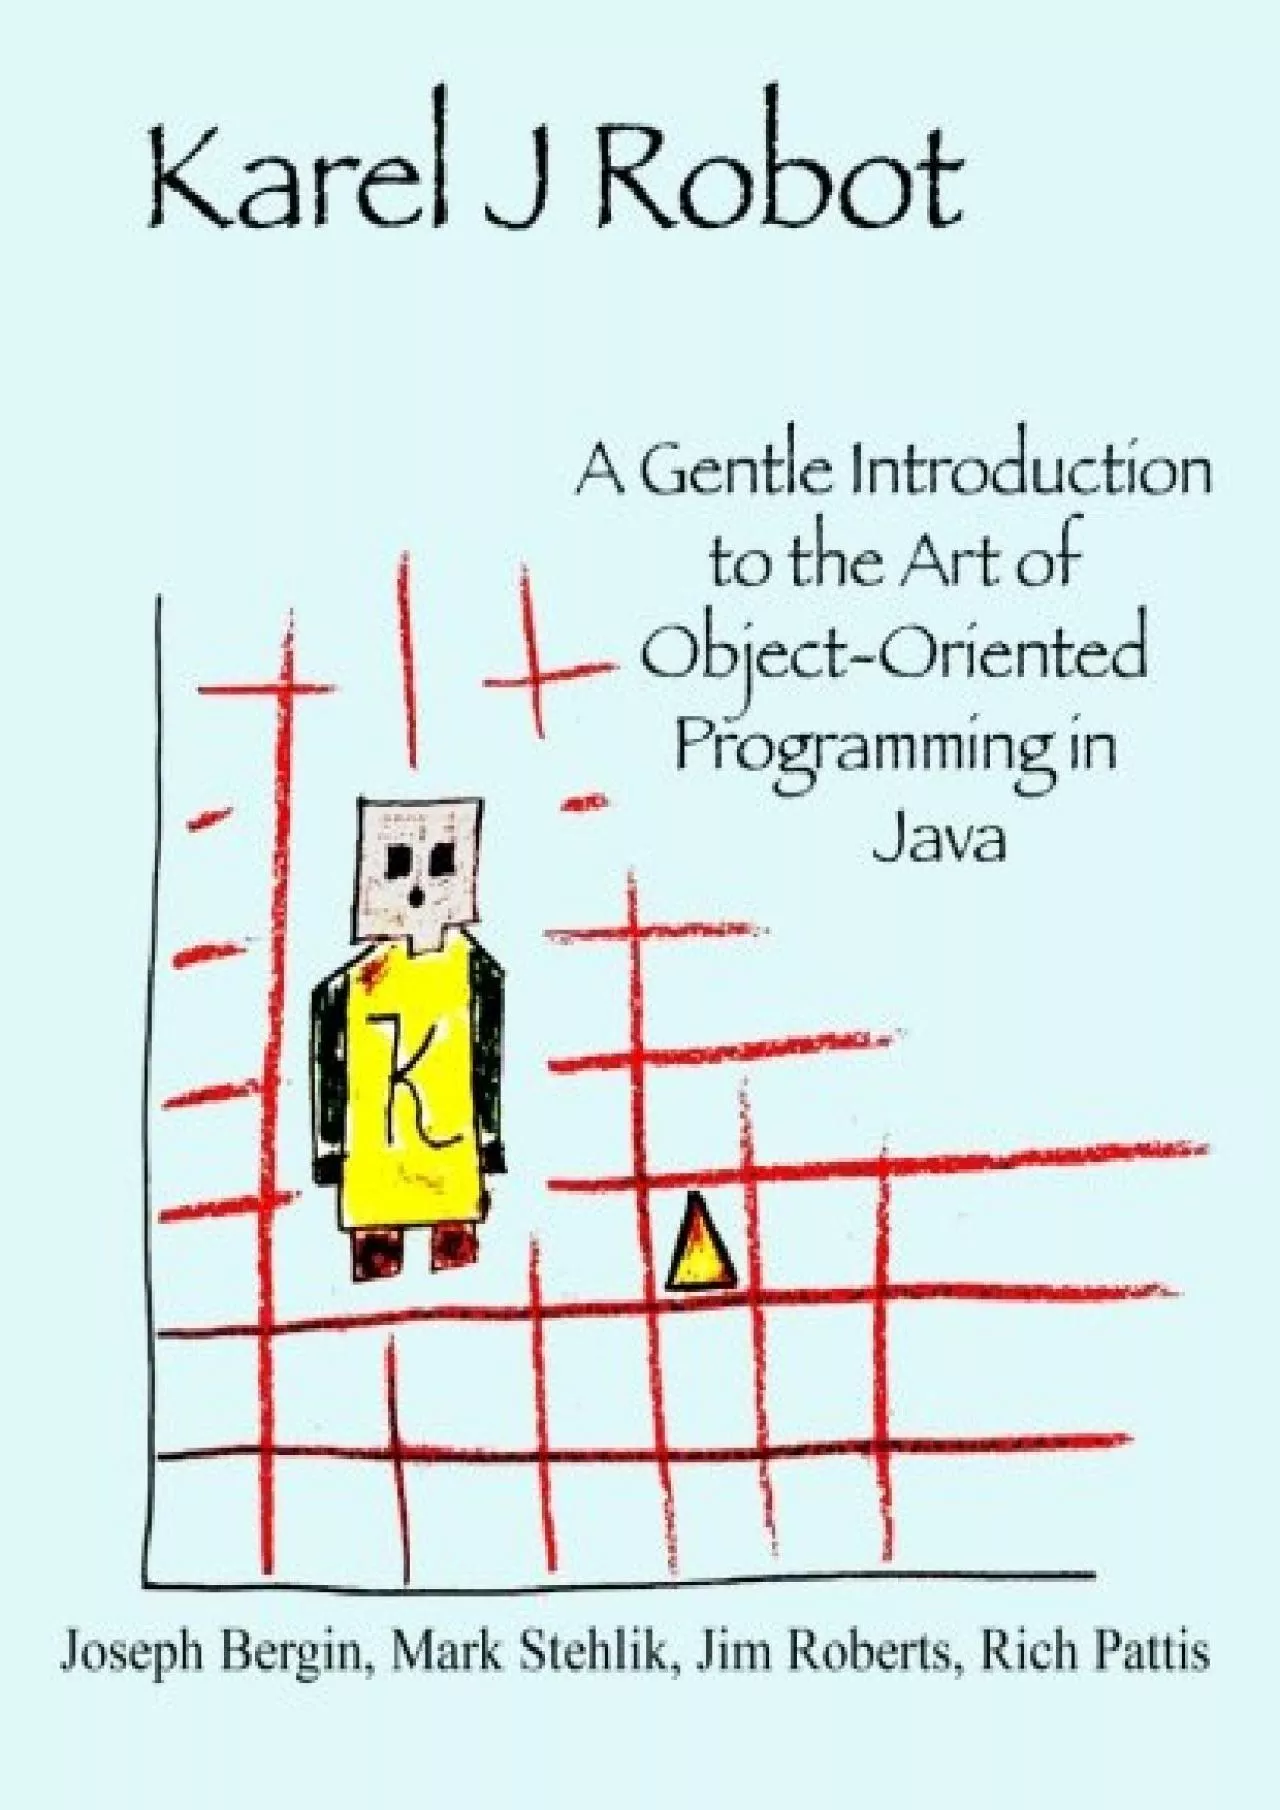 [READING BOOK]-Karel J Robot: A Gentle Introduction to the Art of Object-Oriented Programming